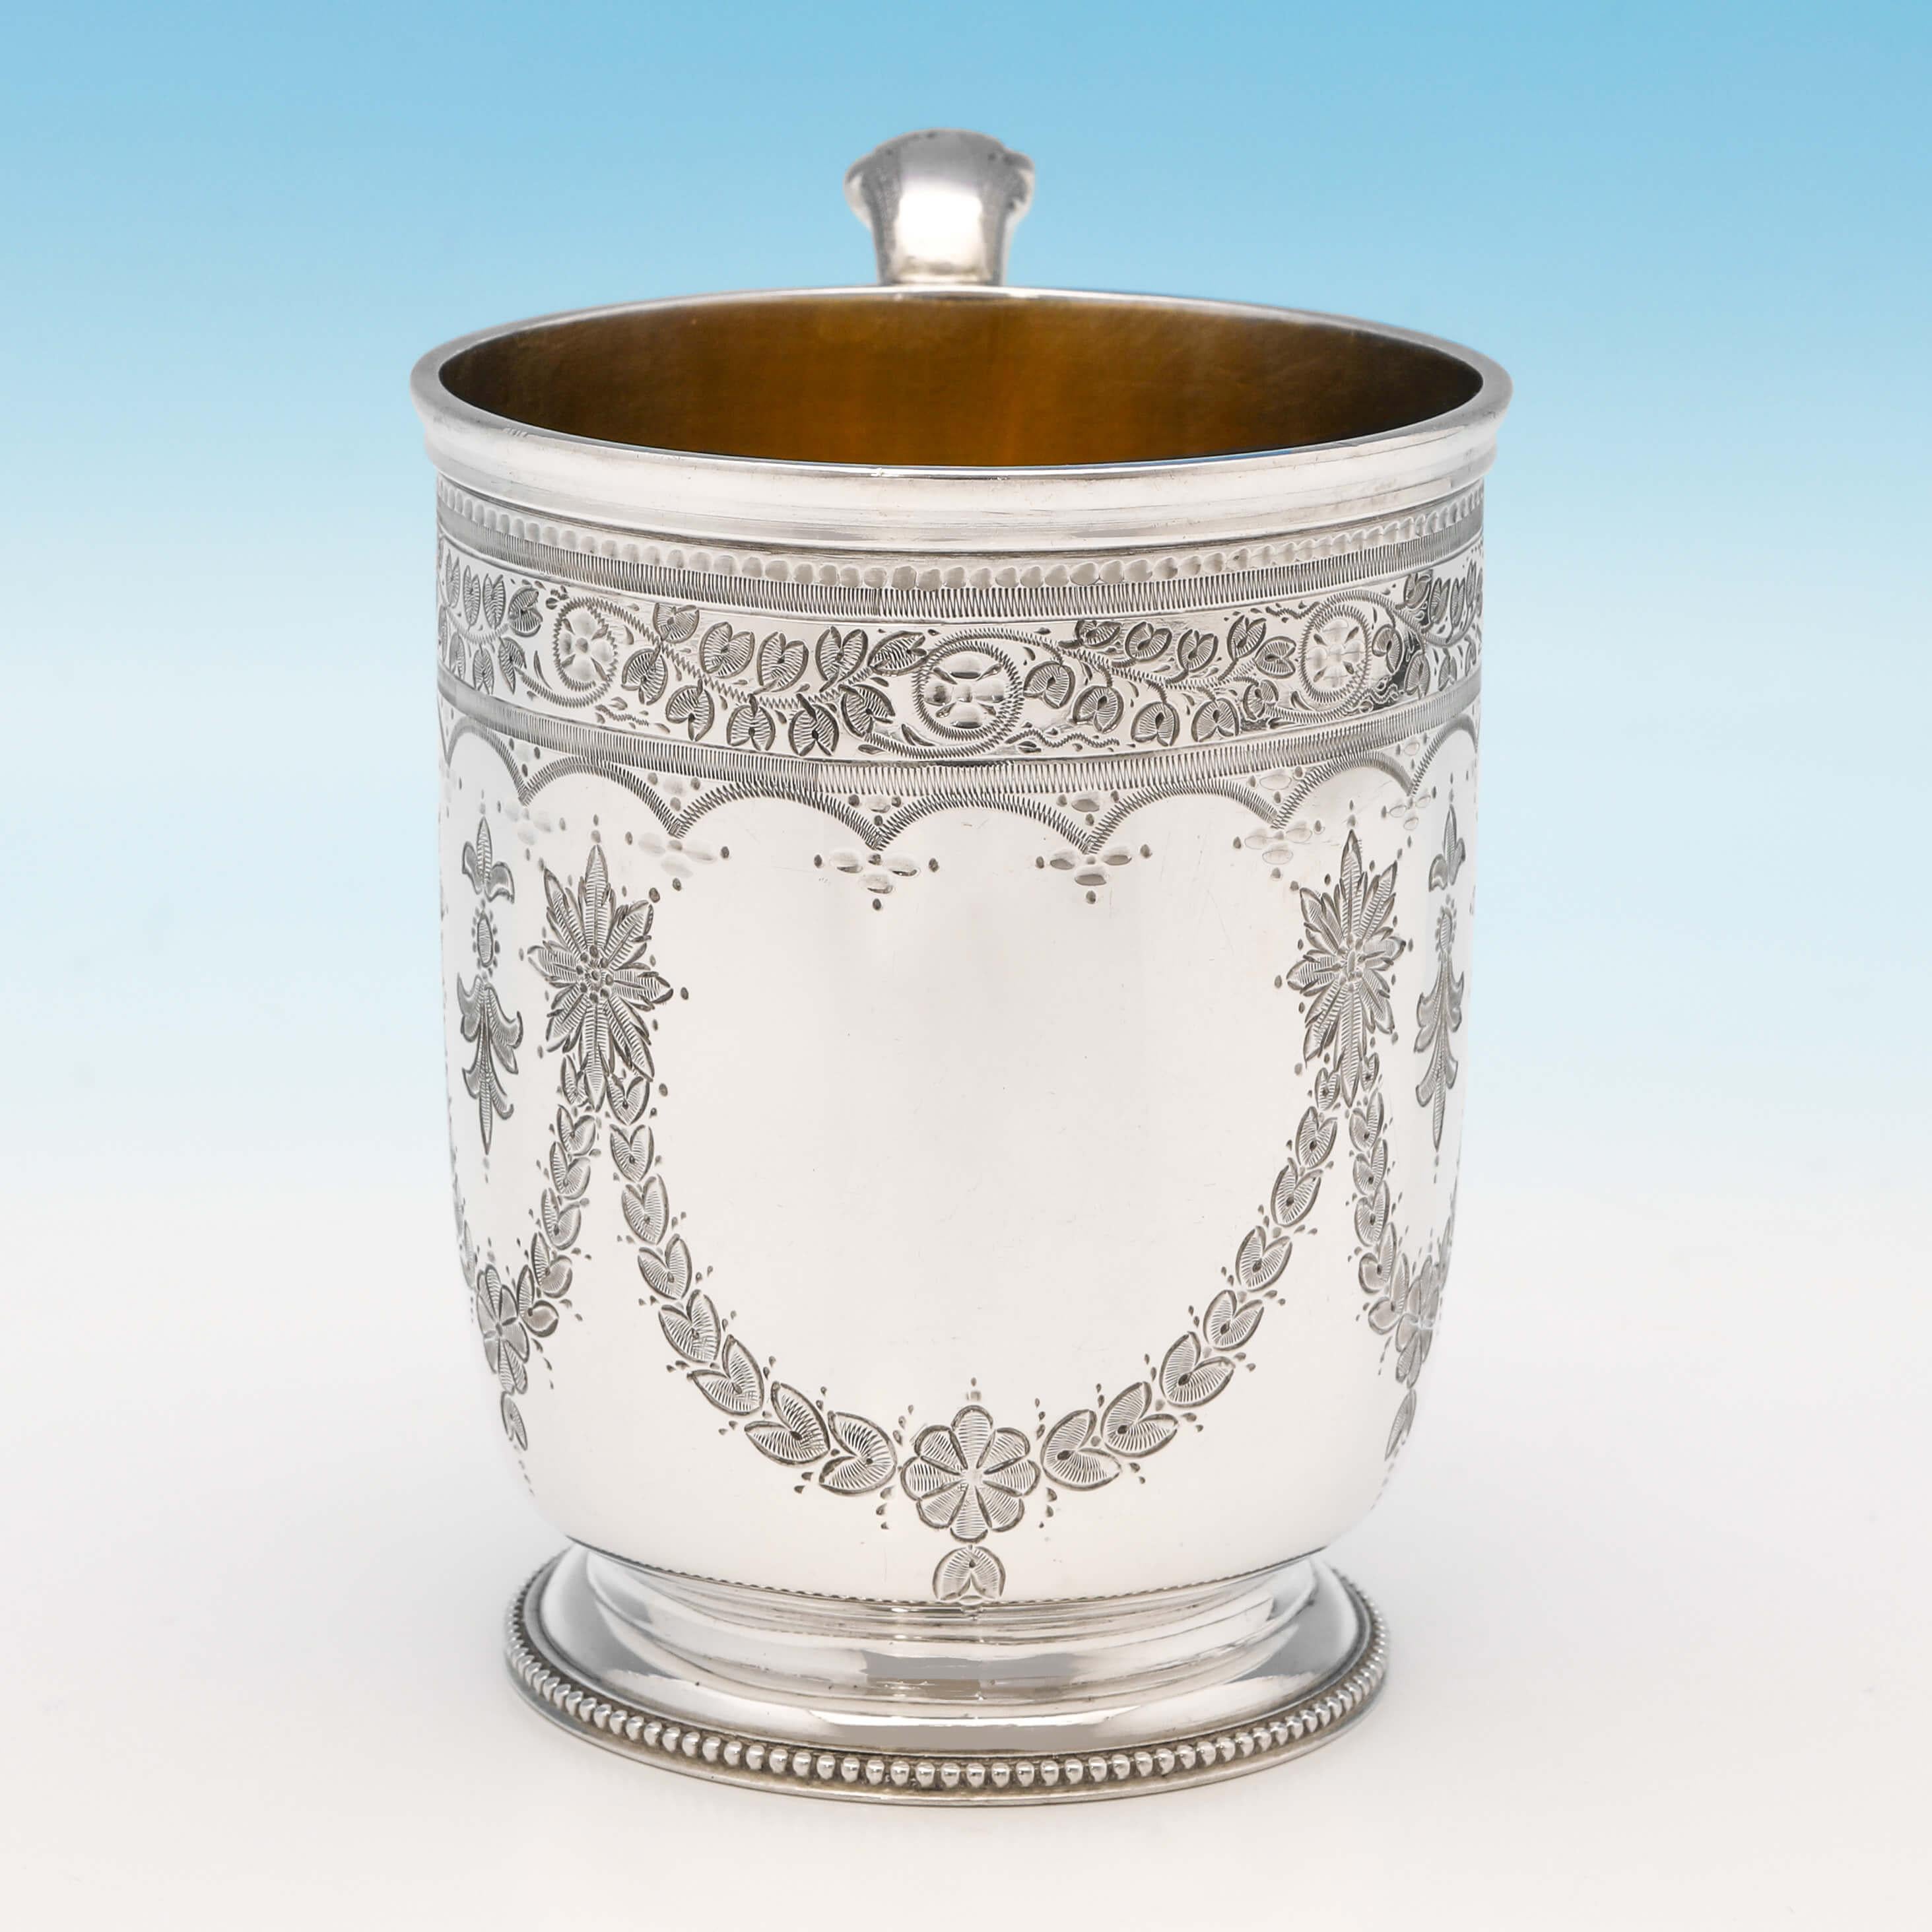 Hallmarked in London in 1872 by Henry Wilkinson & Co., this attractive, Victorian, antique sterling silver christening mug, features striking engraved decoration, a bead bordered base, an acanthus handle and a gilt interior. The christening mug